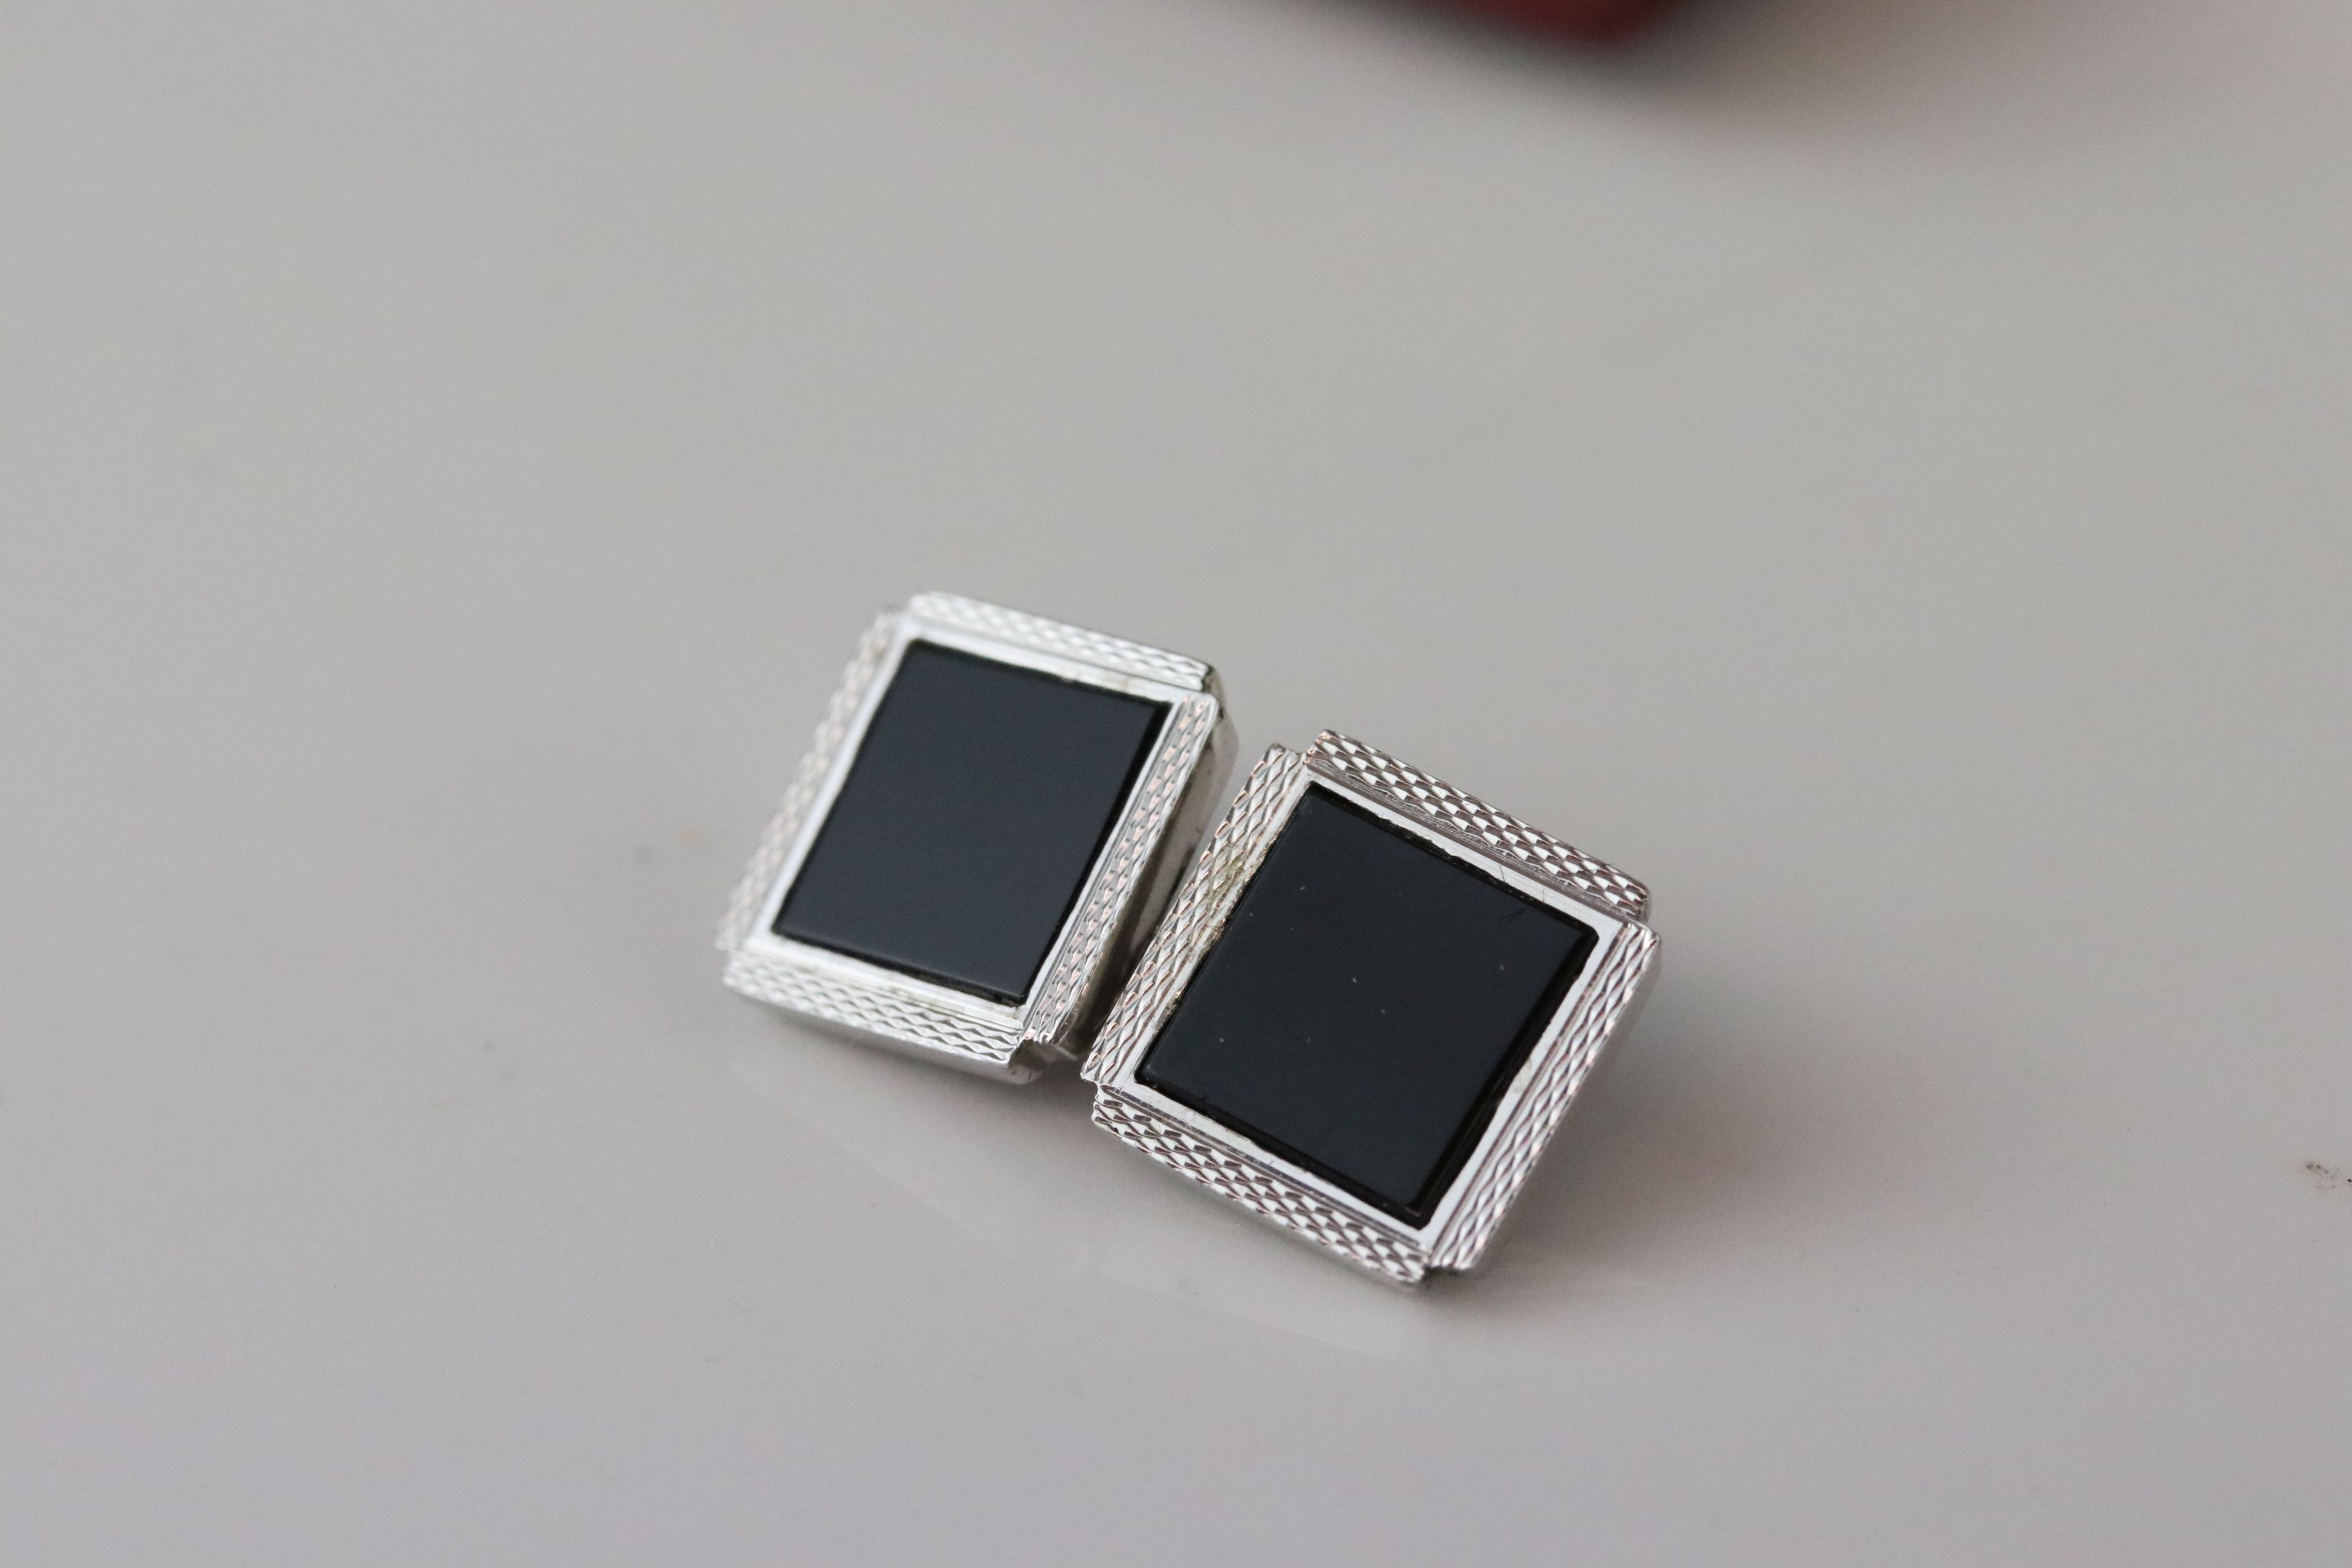 Onyx 9ct carat white gold Gentleman's cufflinks, buttons and dress stud set, square flush set - Image 2 of 8